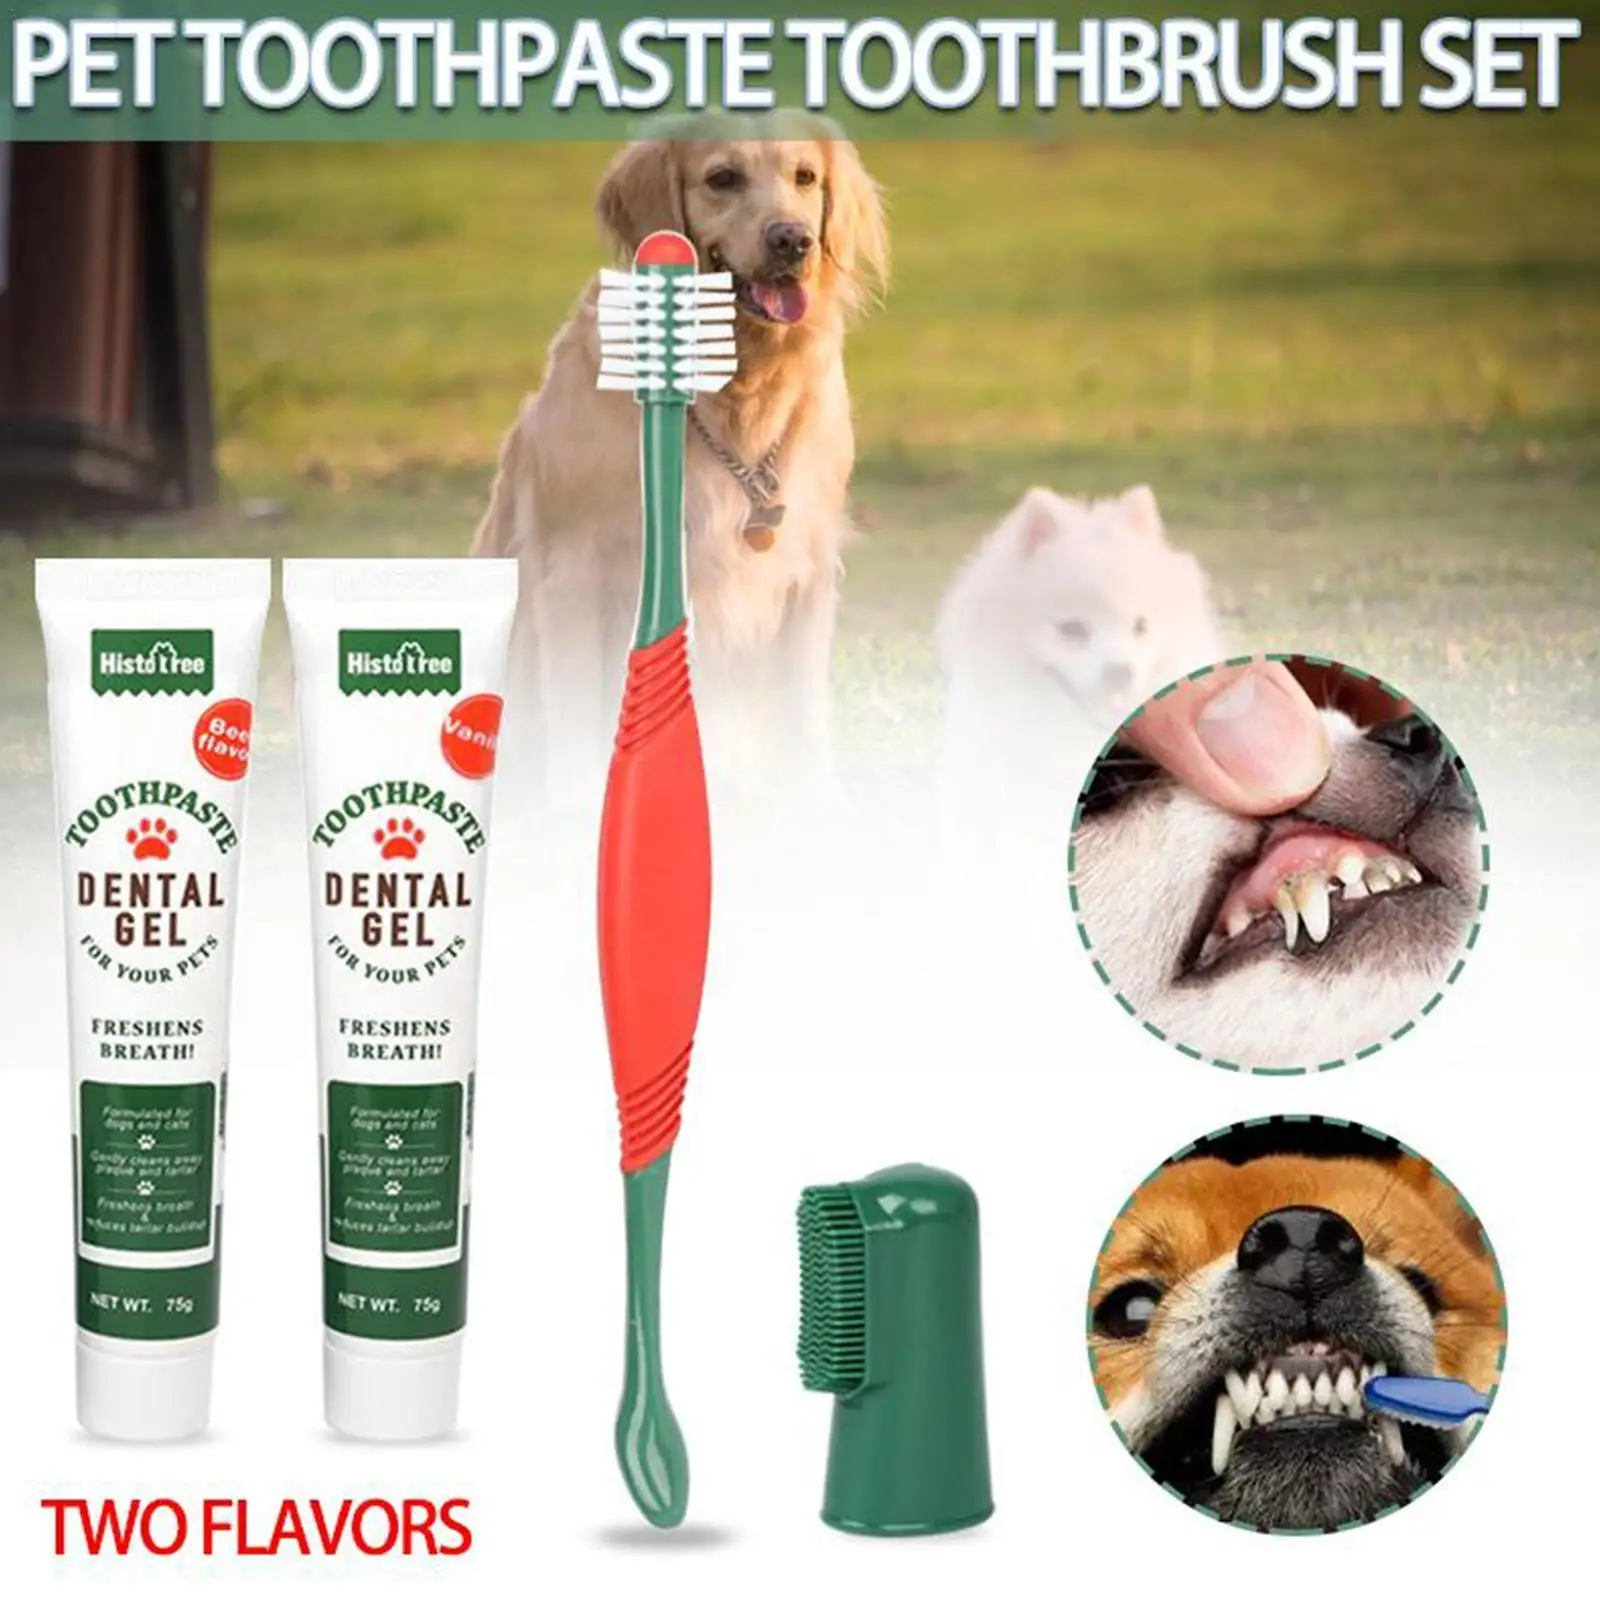 

Pet Tartar Control Kit Contains Toothpaste Toothbrush And Finger Brush For Dogs Dog Teeth Cleaning Kit, Pet Dental Care O2y5